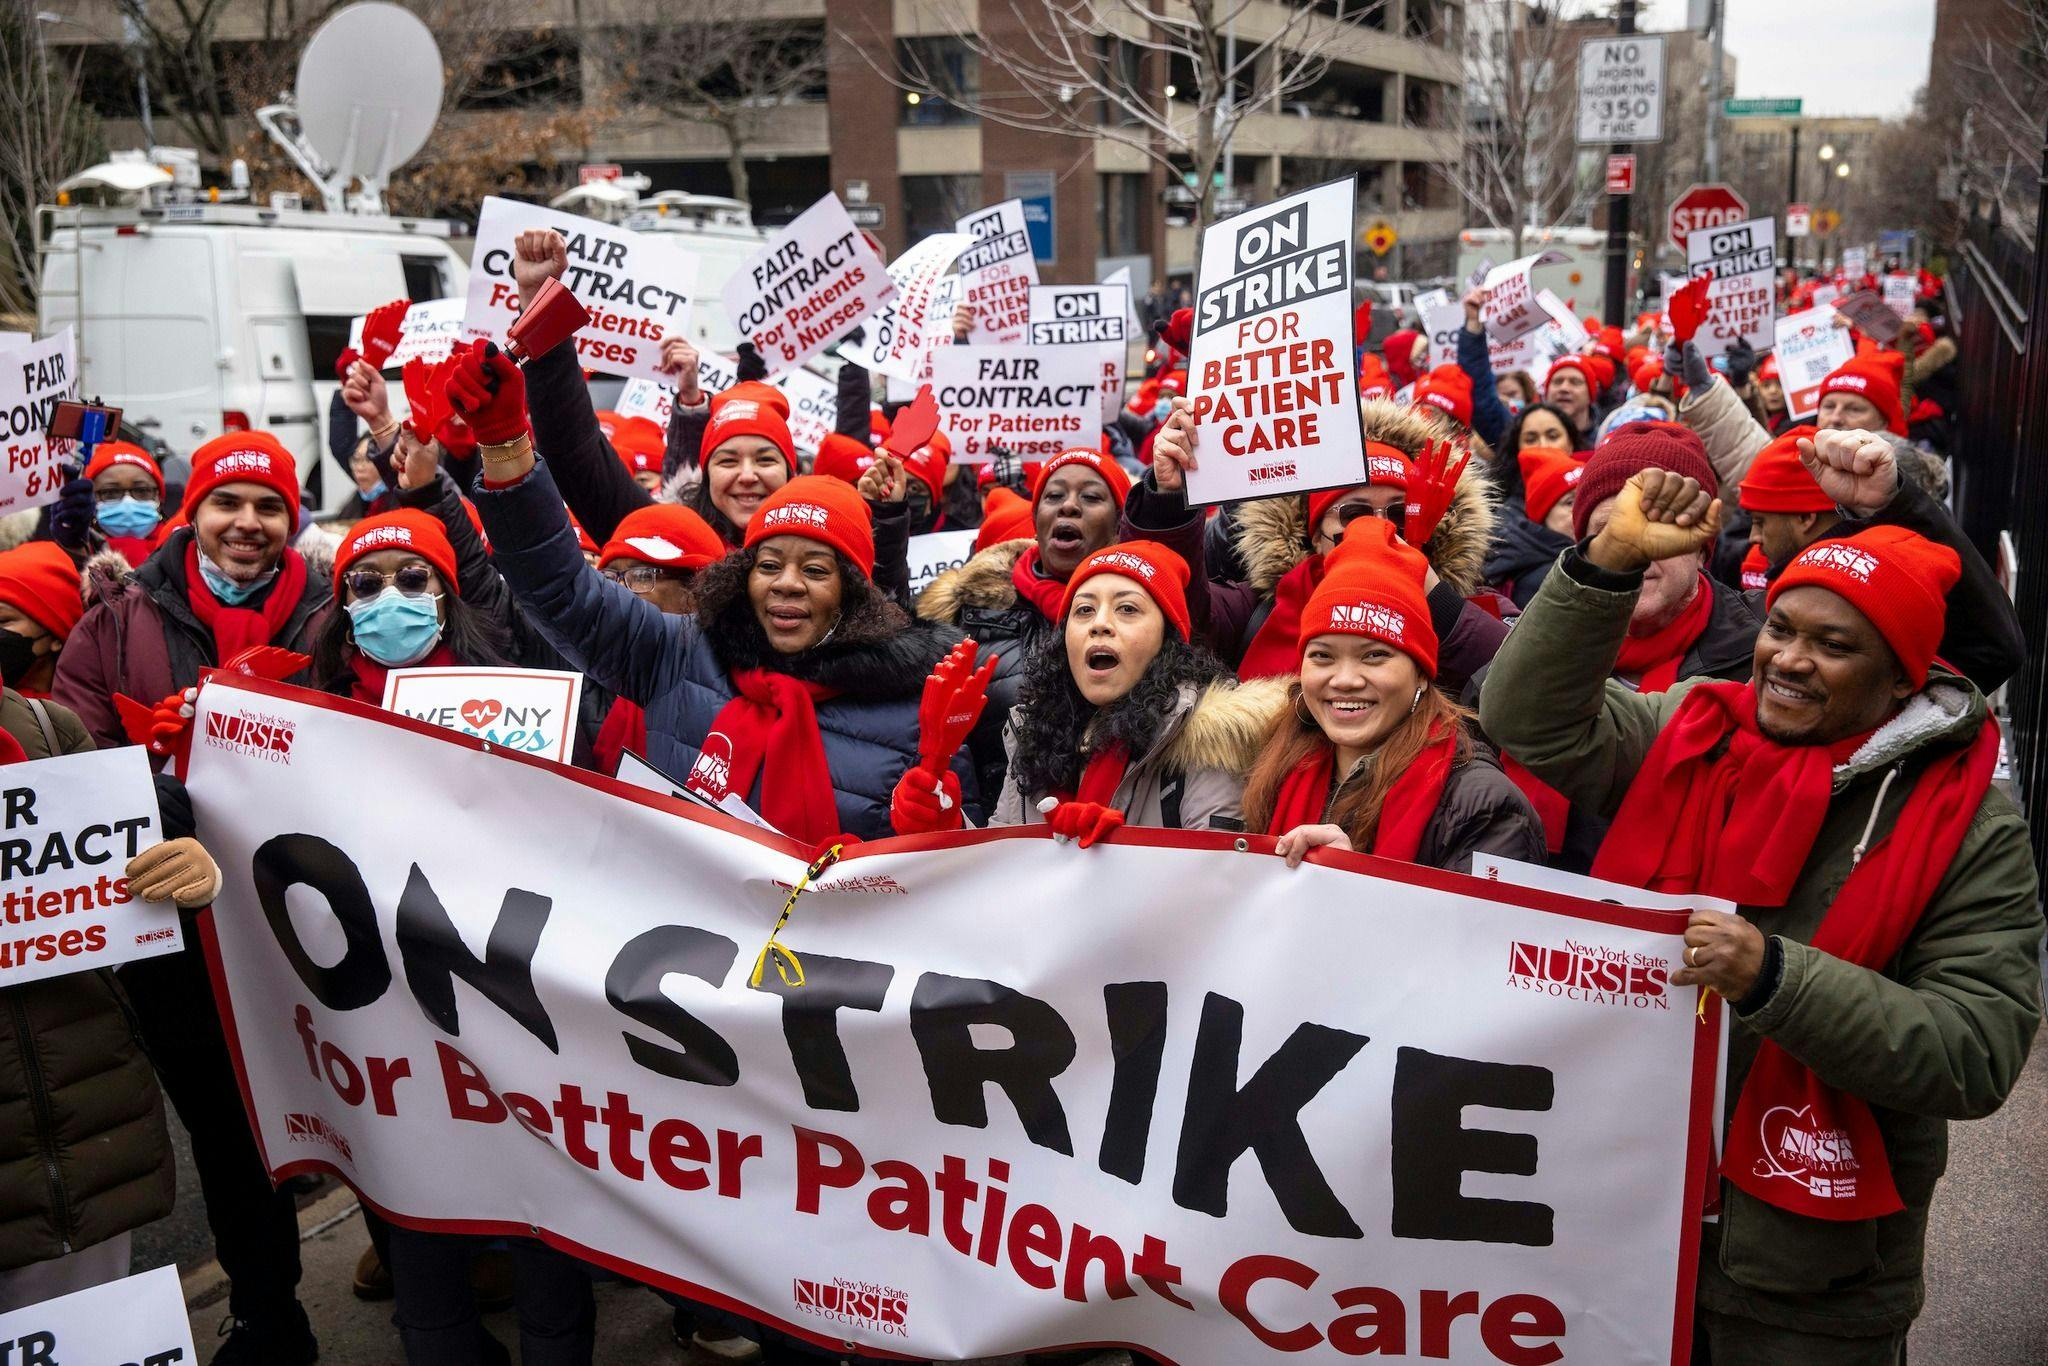 New York nurses went on strike, and it’s just the beginning: ‘We will see more strikes’